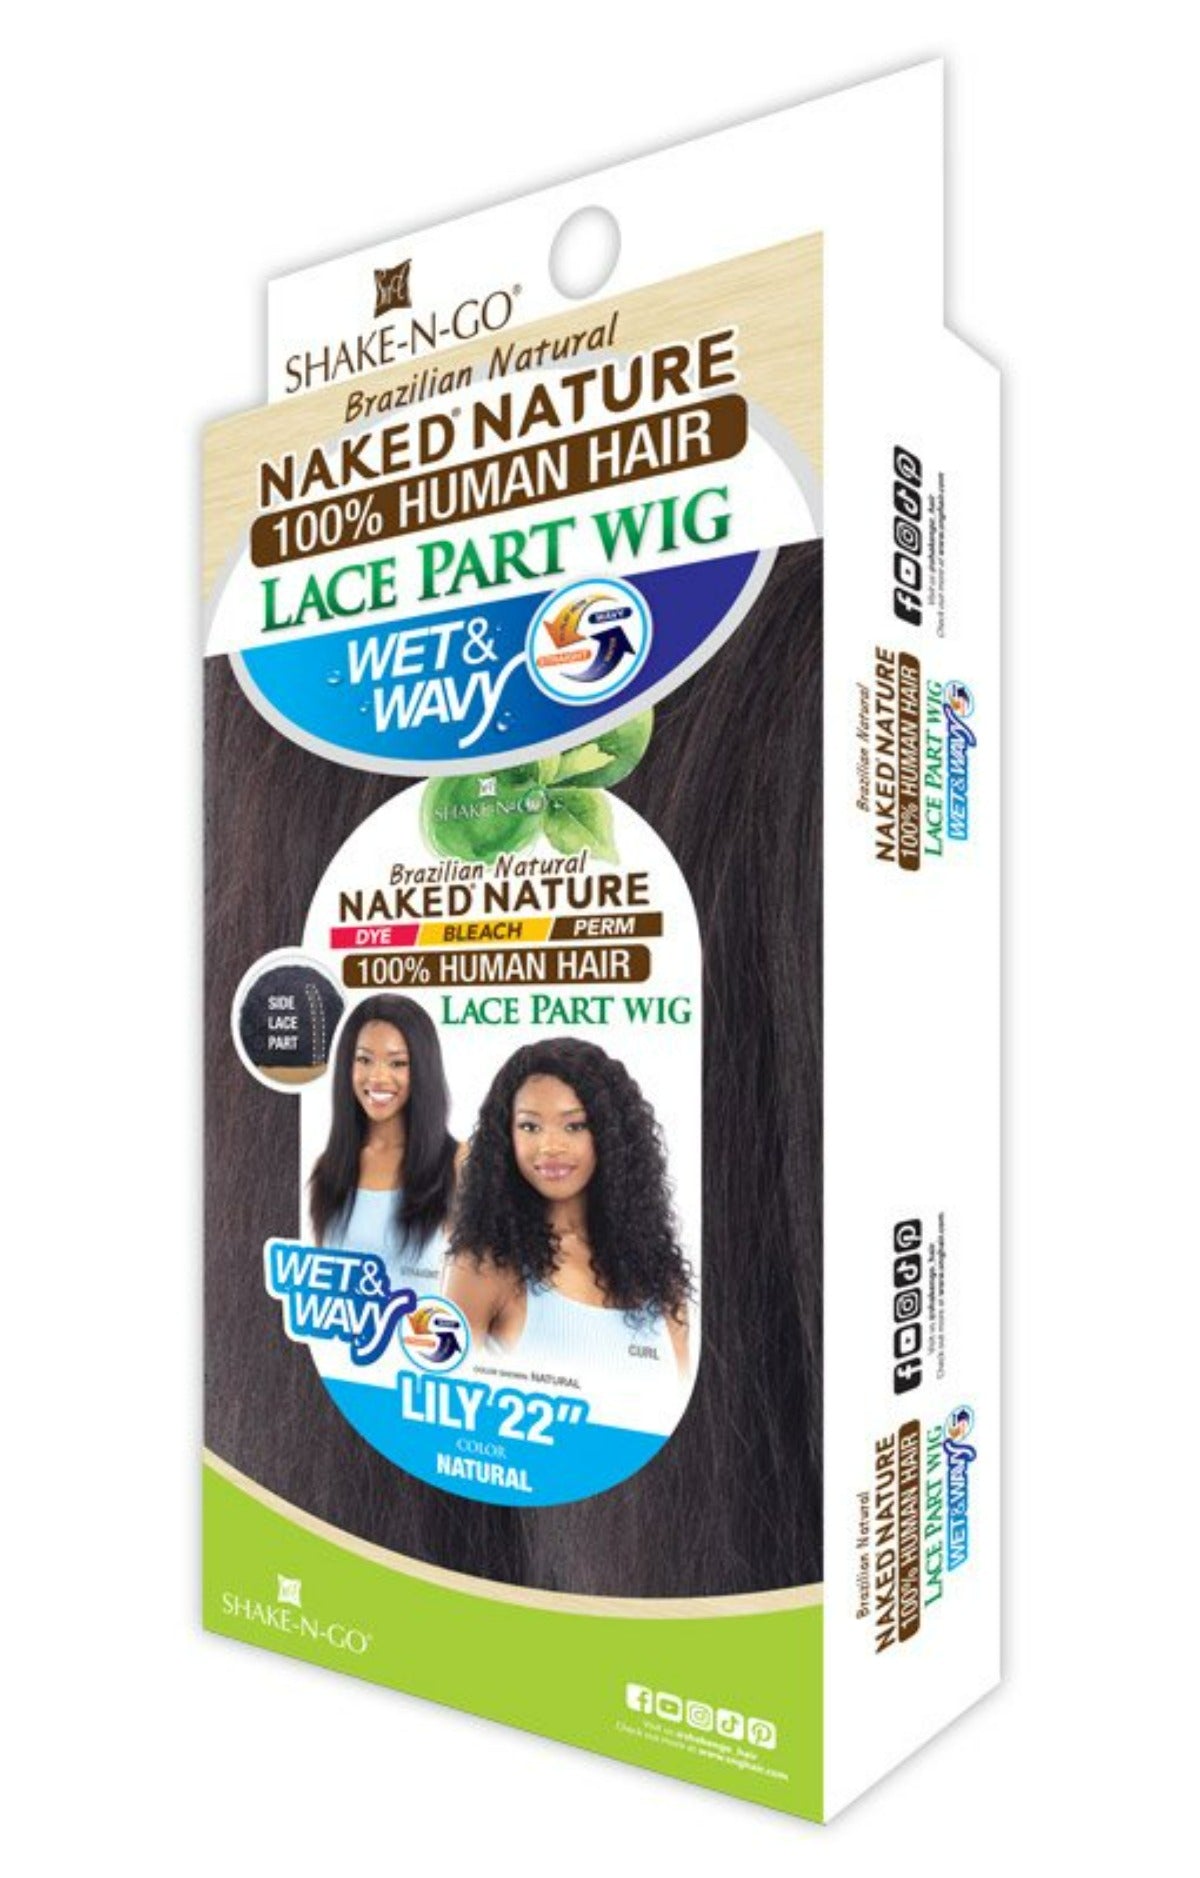 Shake N Go Naked Nature 100% Human Hair Lace Part Wig Wet & Wavy LILY 22"